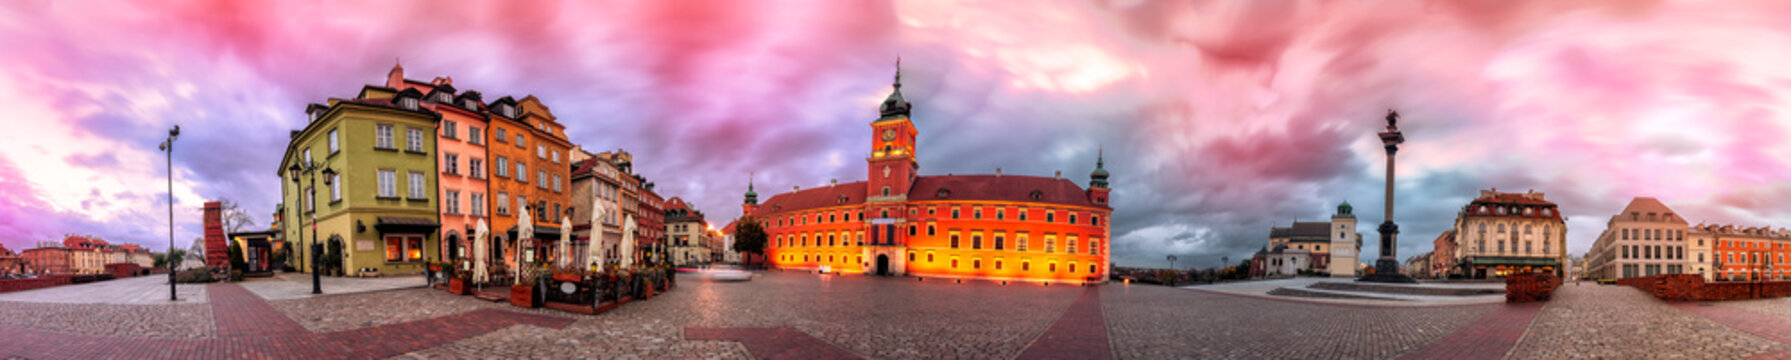 Fototapeta Warsaw Royal Castle Square sunrise skyline, Poland. 360 degree pnanoram from 28 images with post processing effects